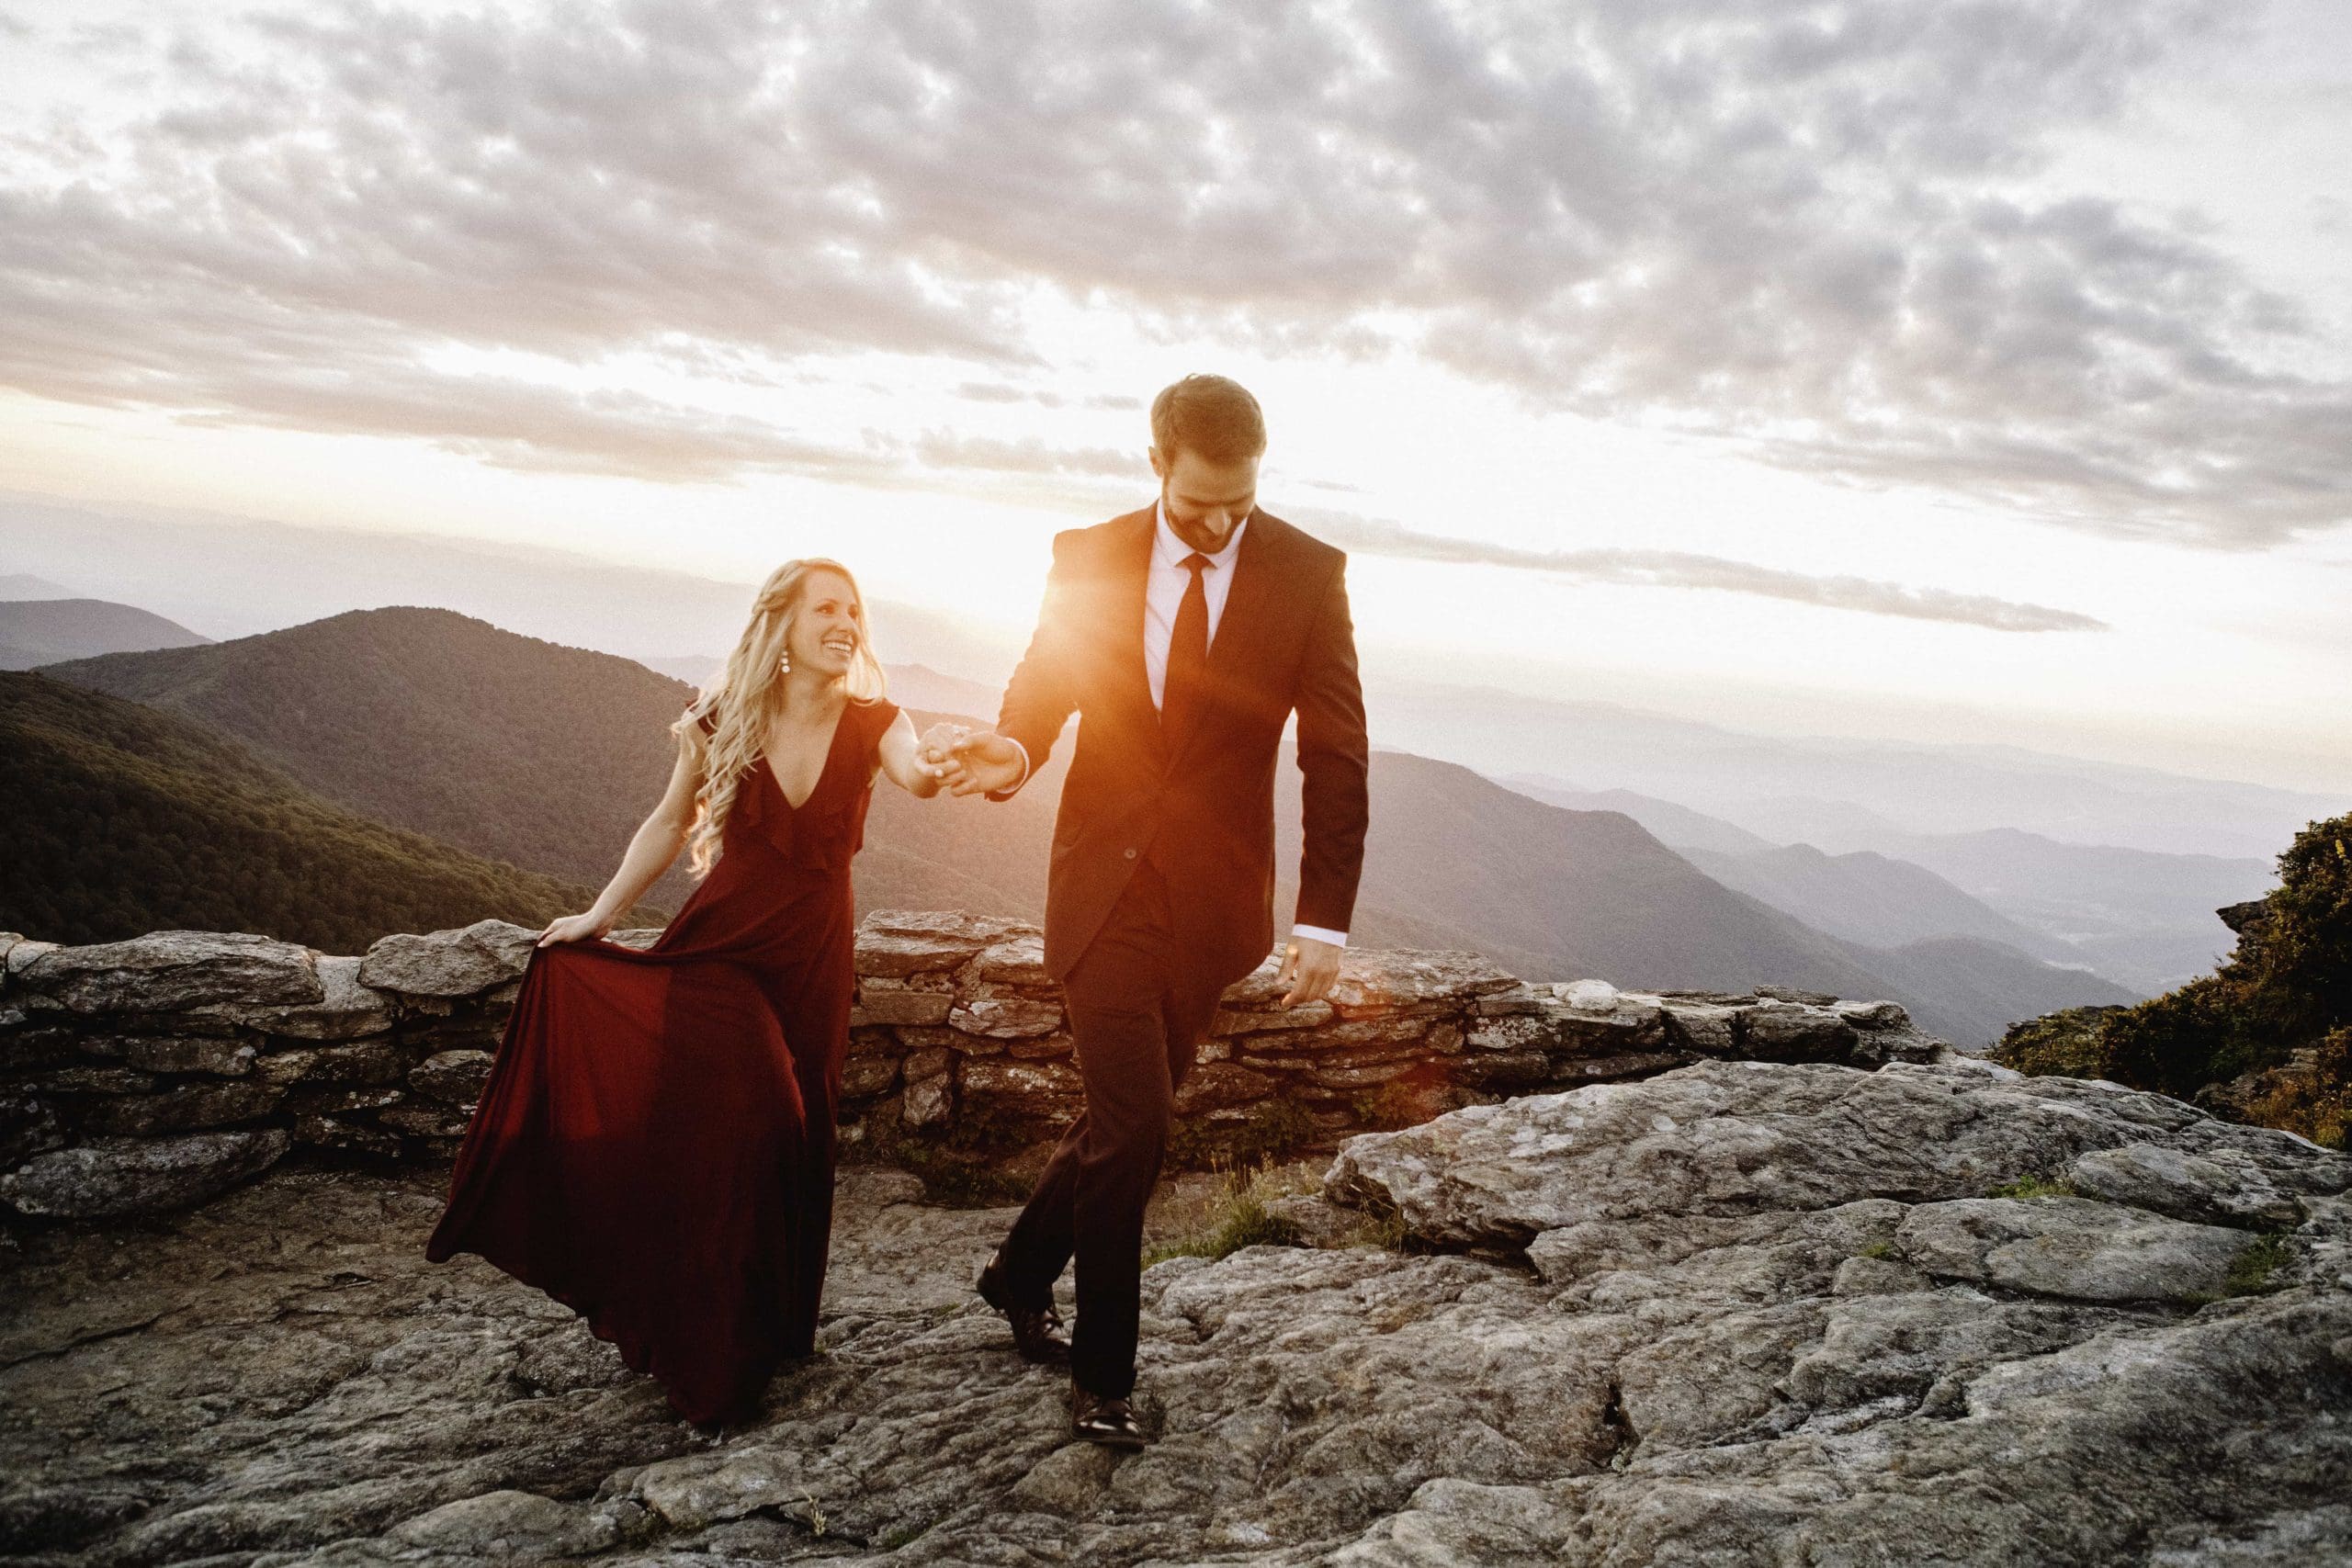 Man in suit holding fiances hand walking along rocky mountain side with mountain range in background at sunset